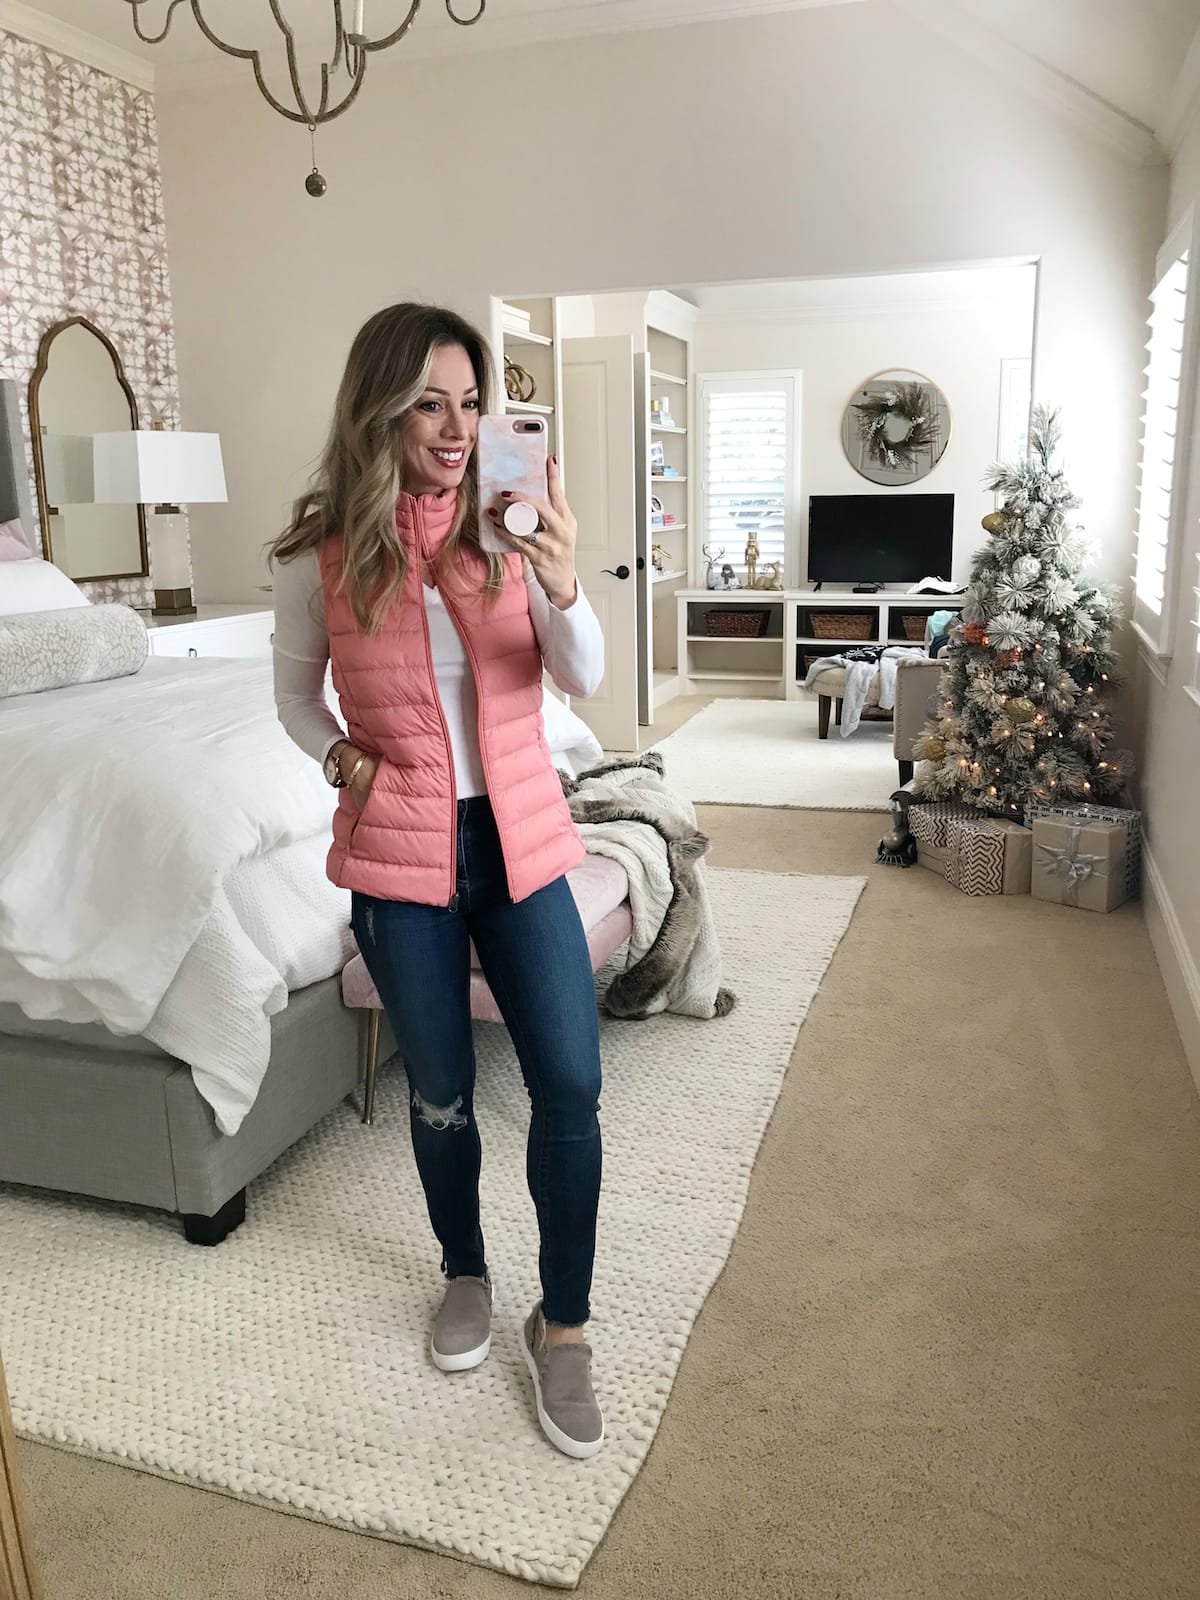 Amazon Fashion Haul - jeans and pink puffer vest